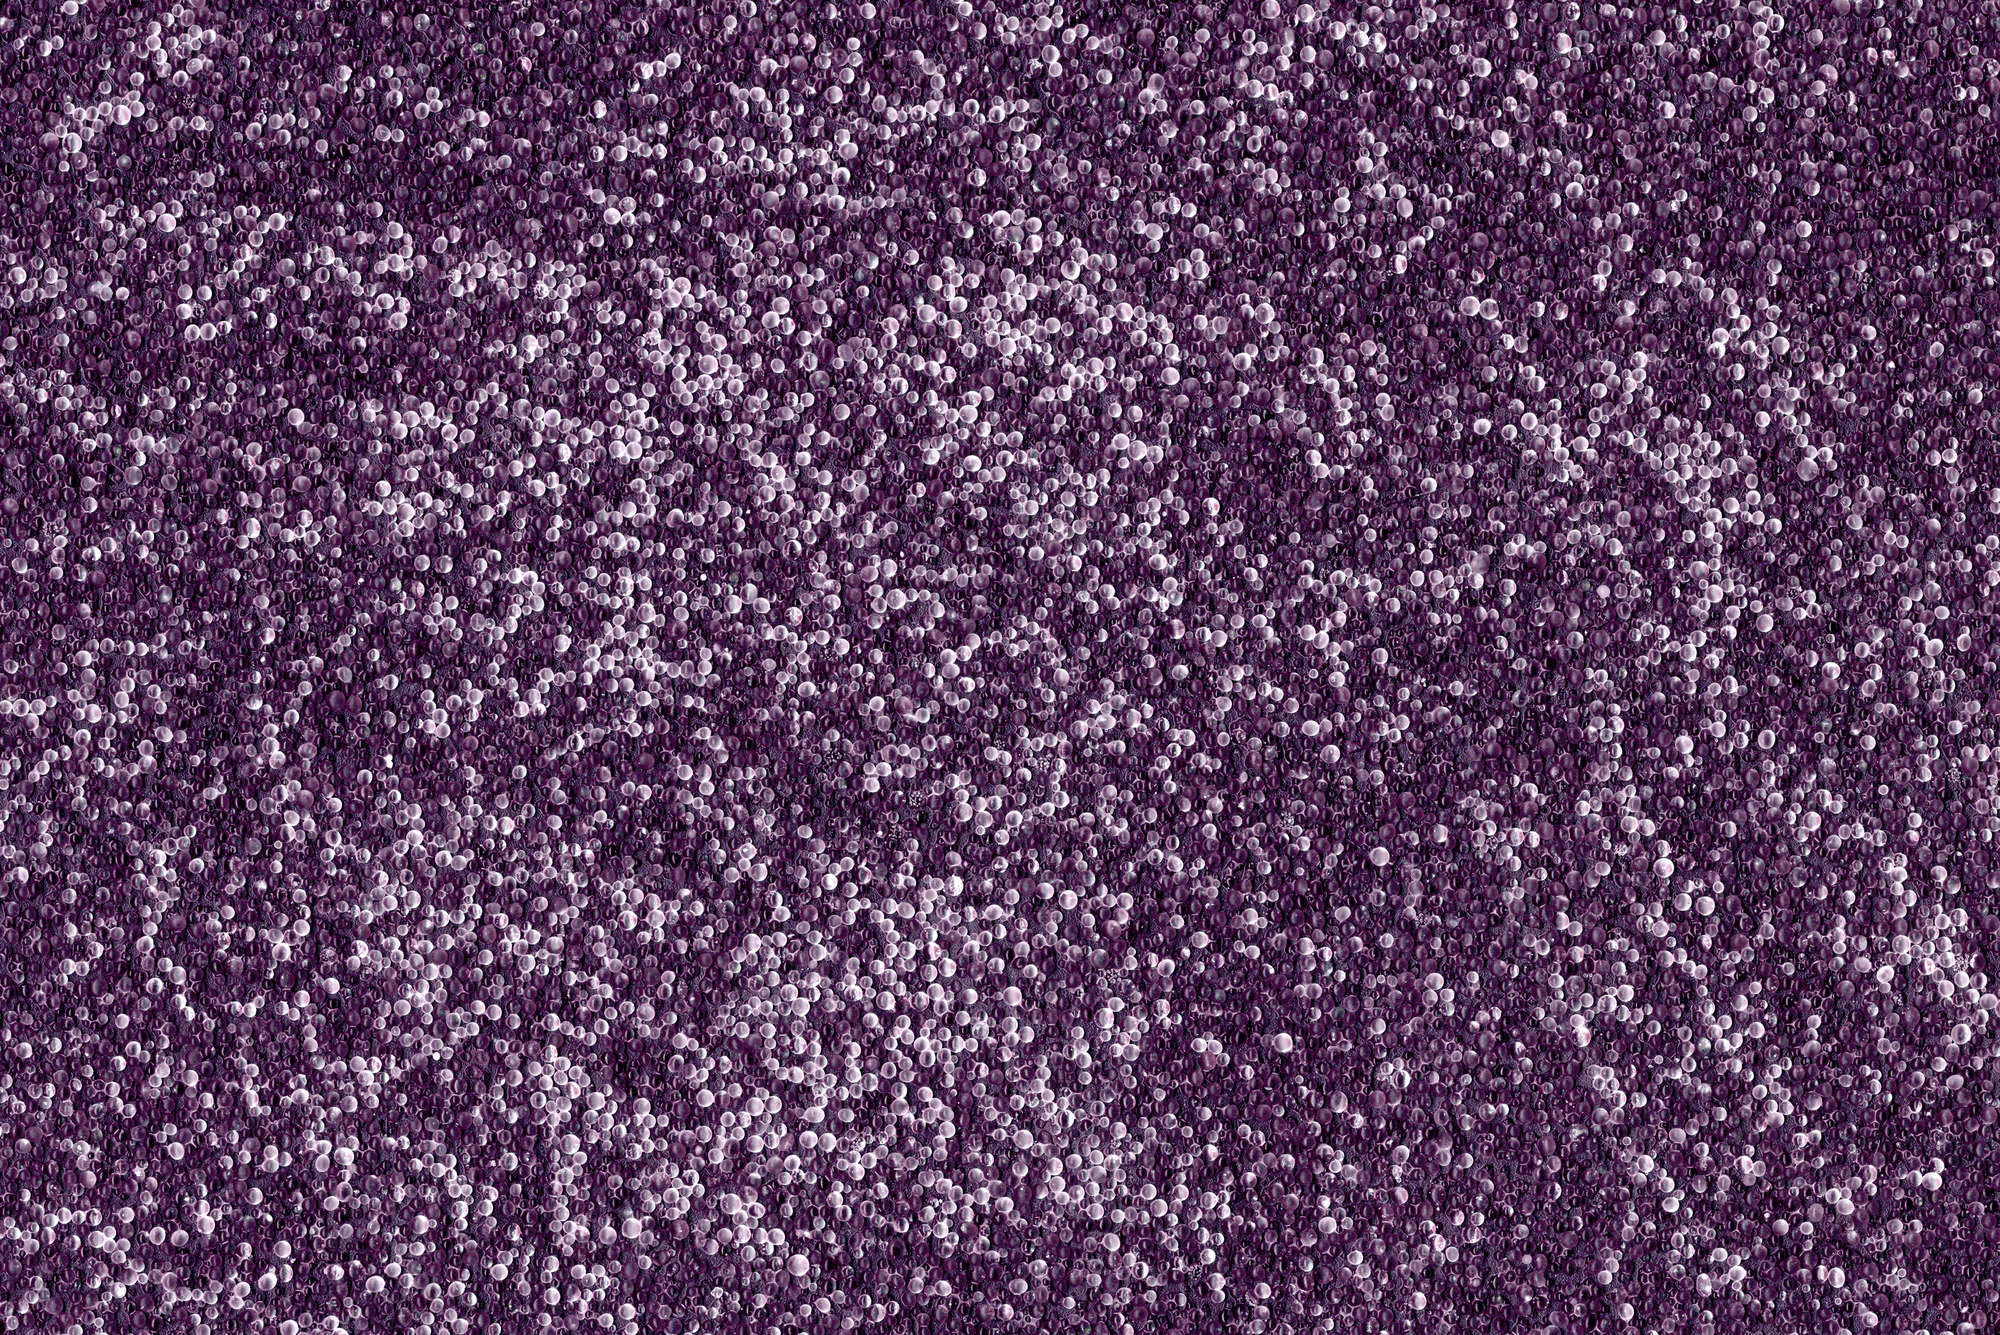             Photo wallpaper many small marbles in purple - Premium smooth fleece
        